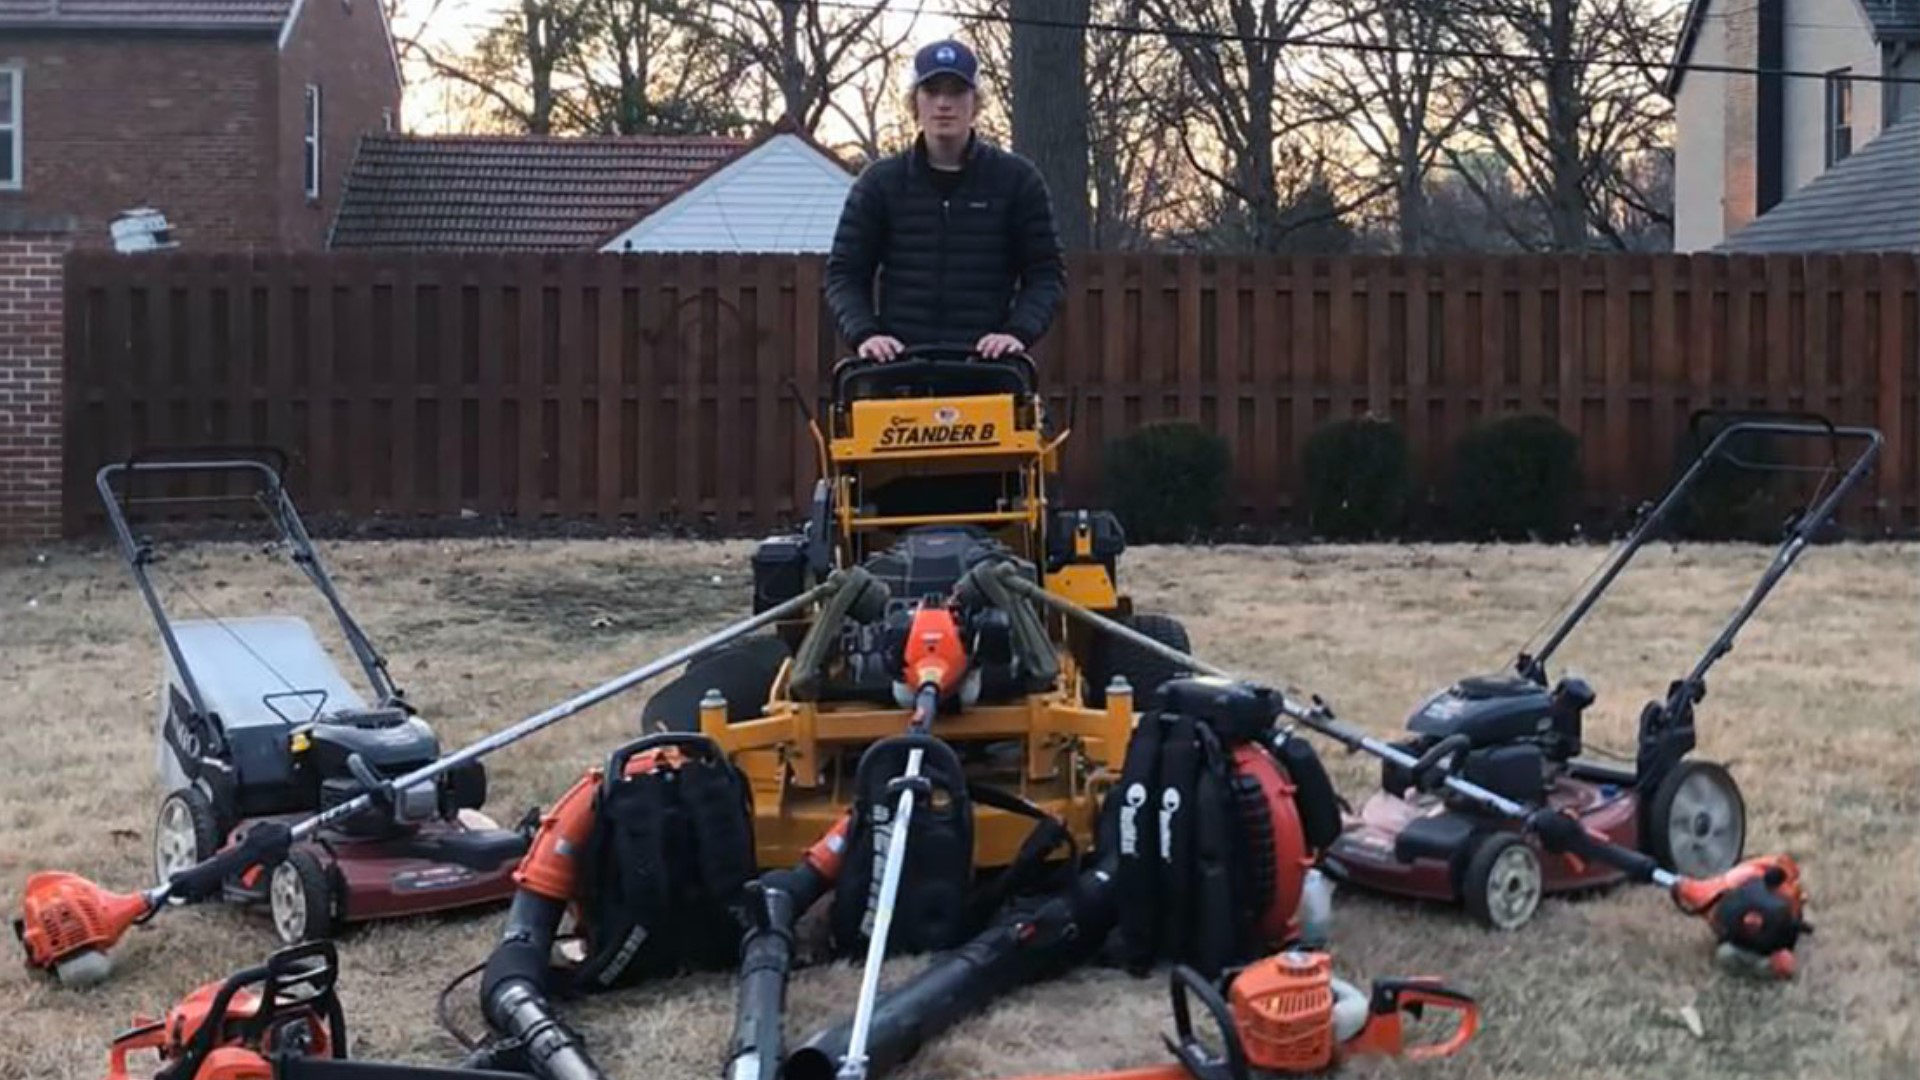 Wilson Stahl, who started his own lawn care business last year, can't make the money he's used to due to some brazen thieves